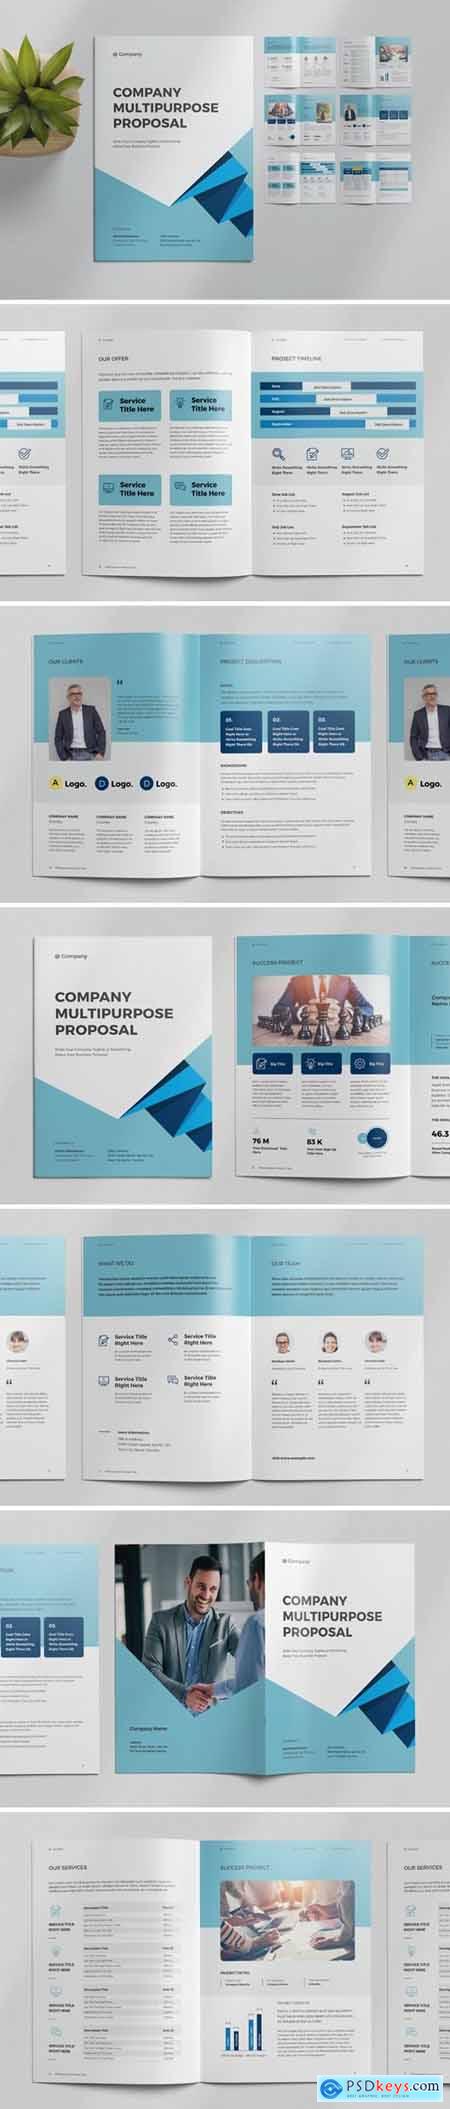 Proposal Layout with Blue Geometric Elements